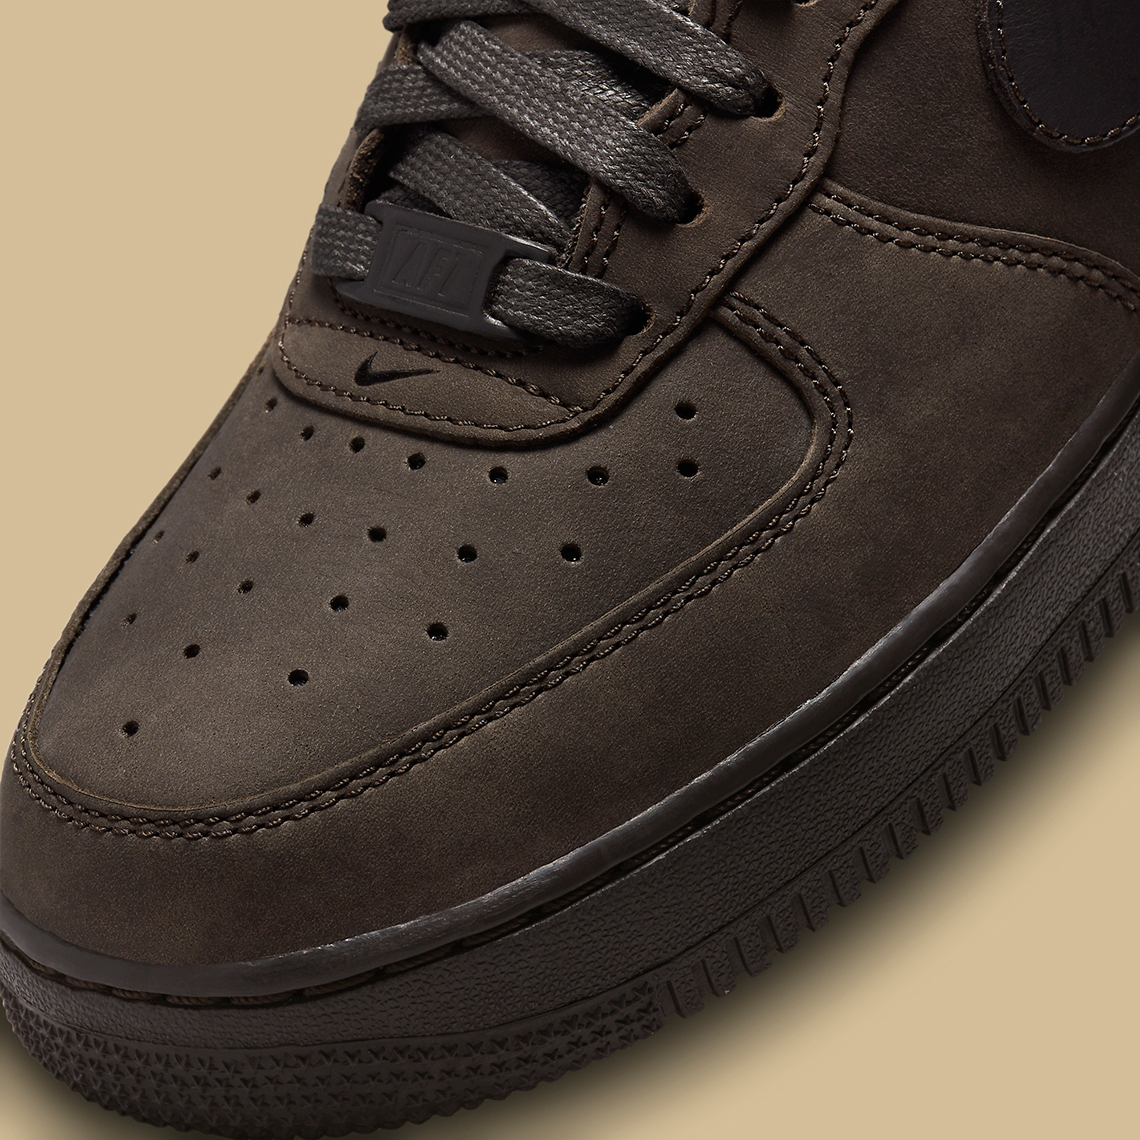 nike air force 1 low chocolate brown dr9503 200 1